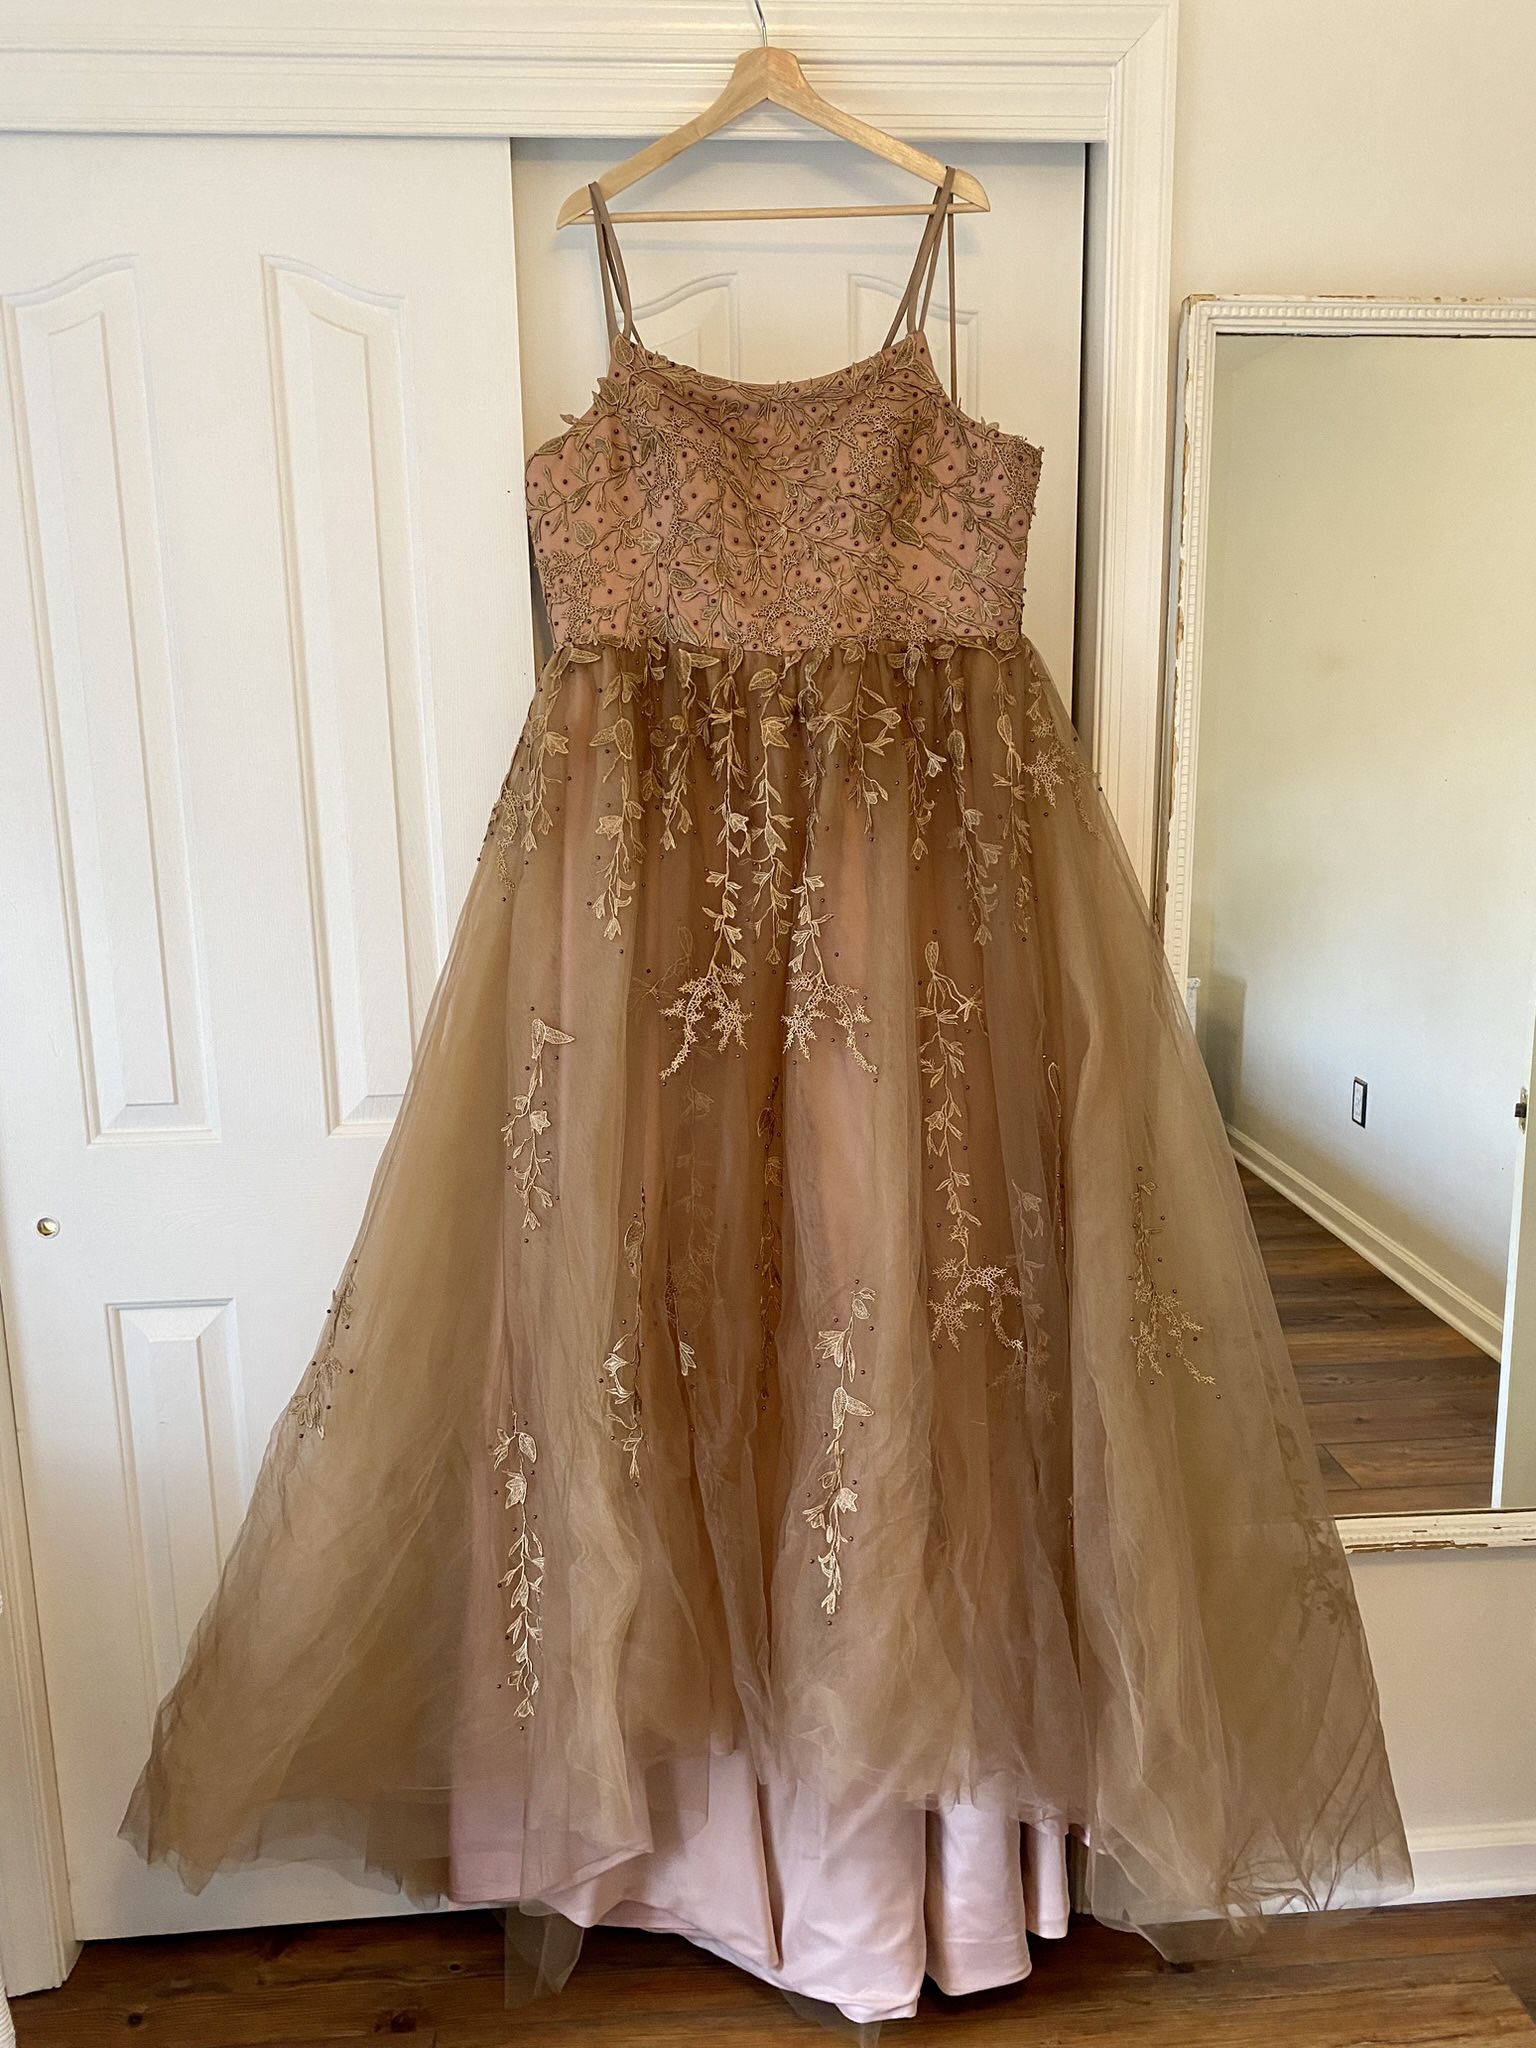 Formal Prom Dress / Gown - Size 16